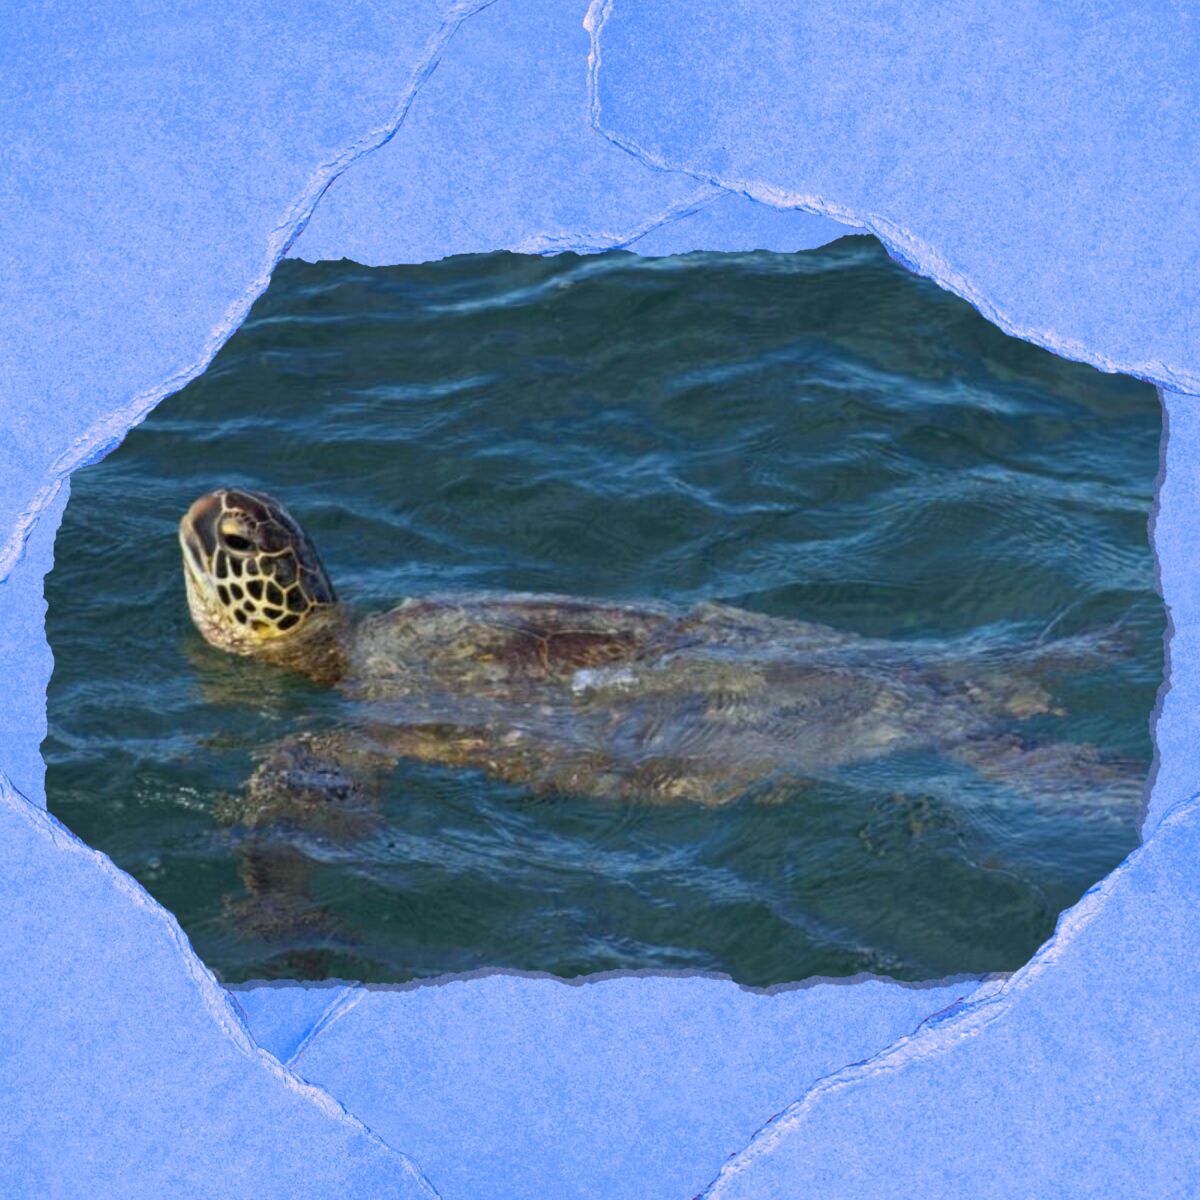 A turtle's head pokes above water as it swims.